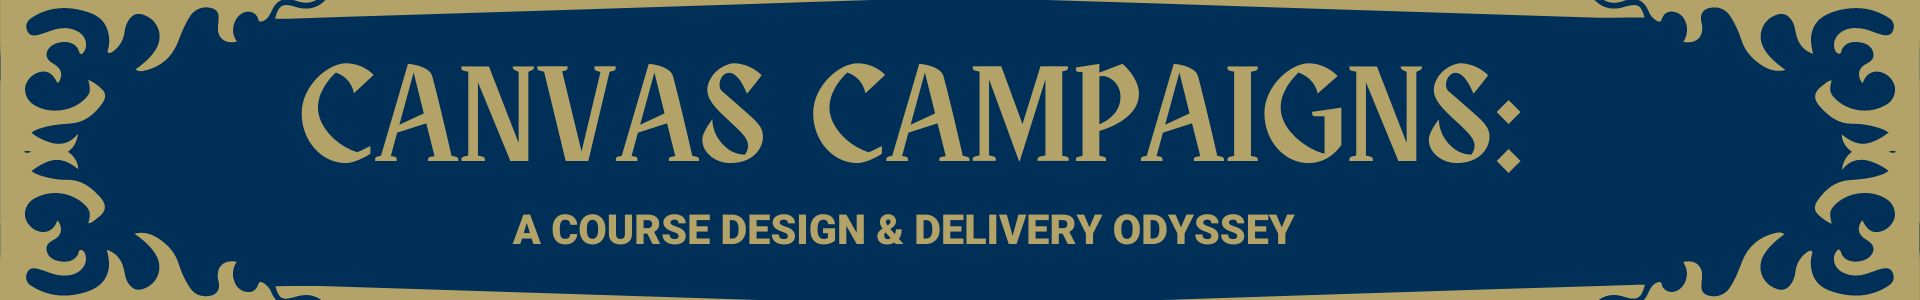 Image has a dark blue background with gold text reading "Canvas Campaigns: A Course Design & Delivery Odyssey."